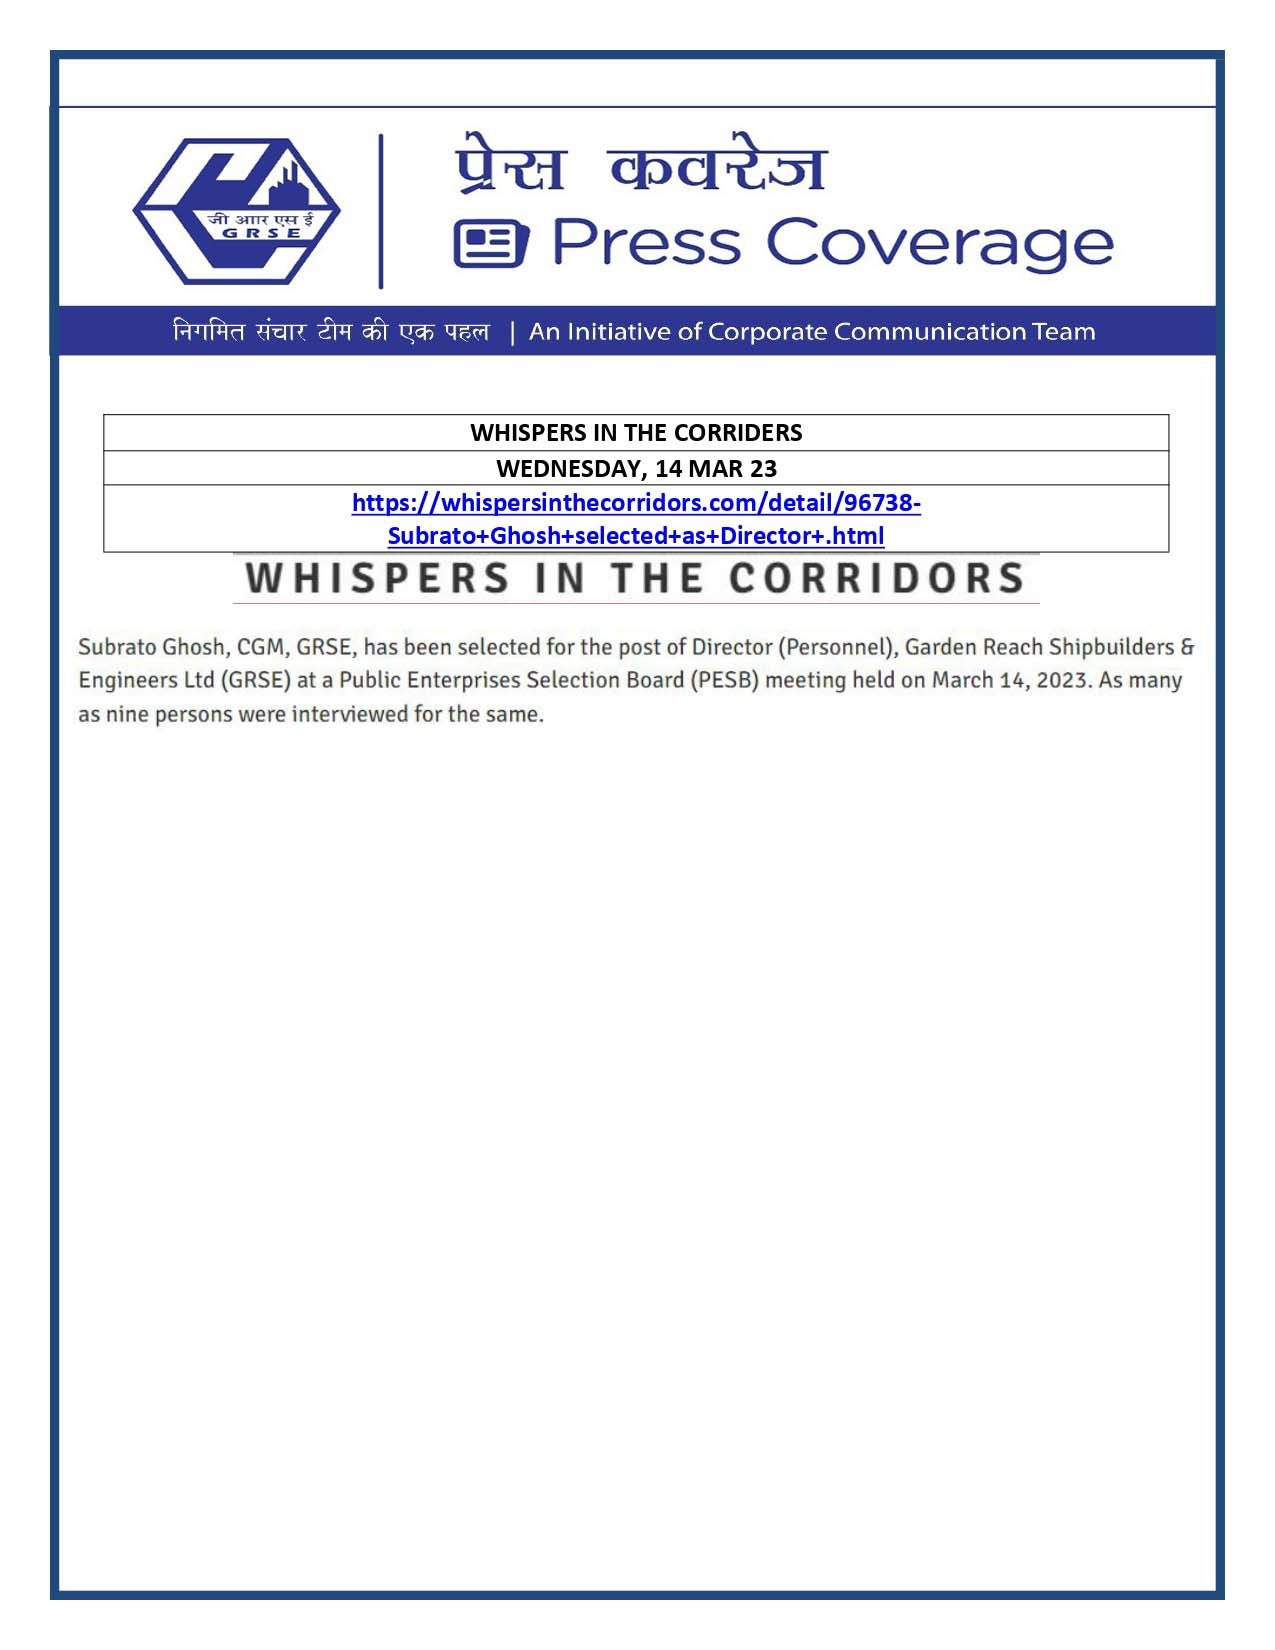 Whispers in the corriders 14 Mar 23